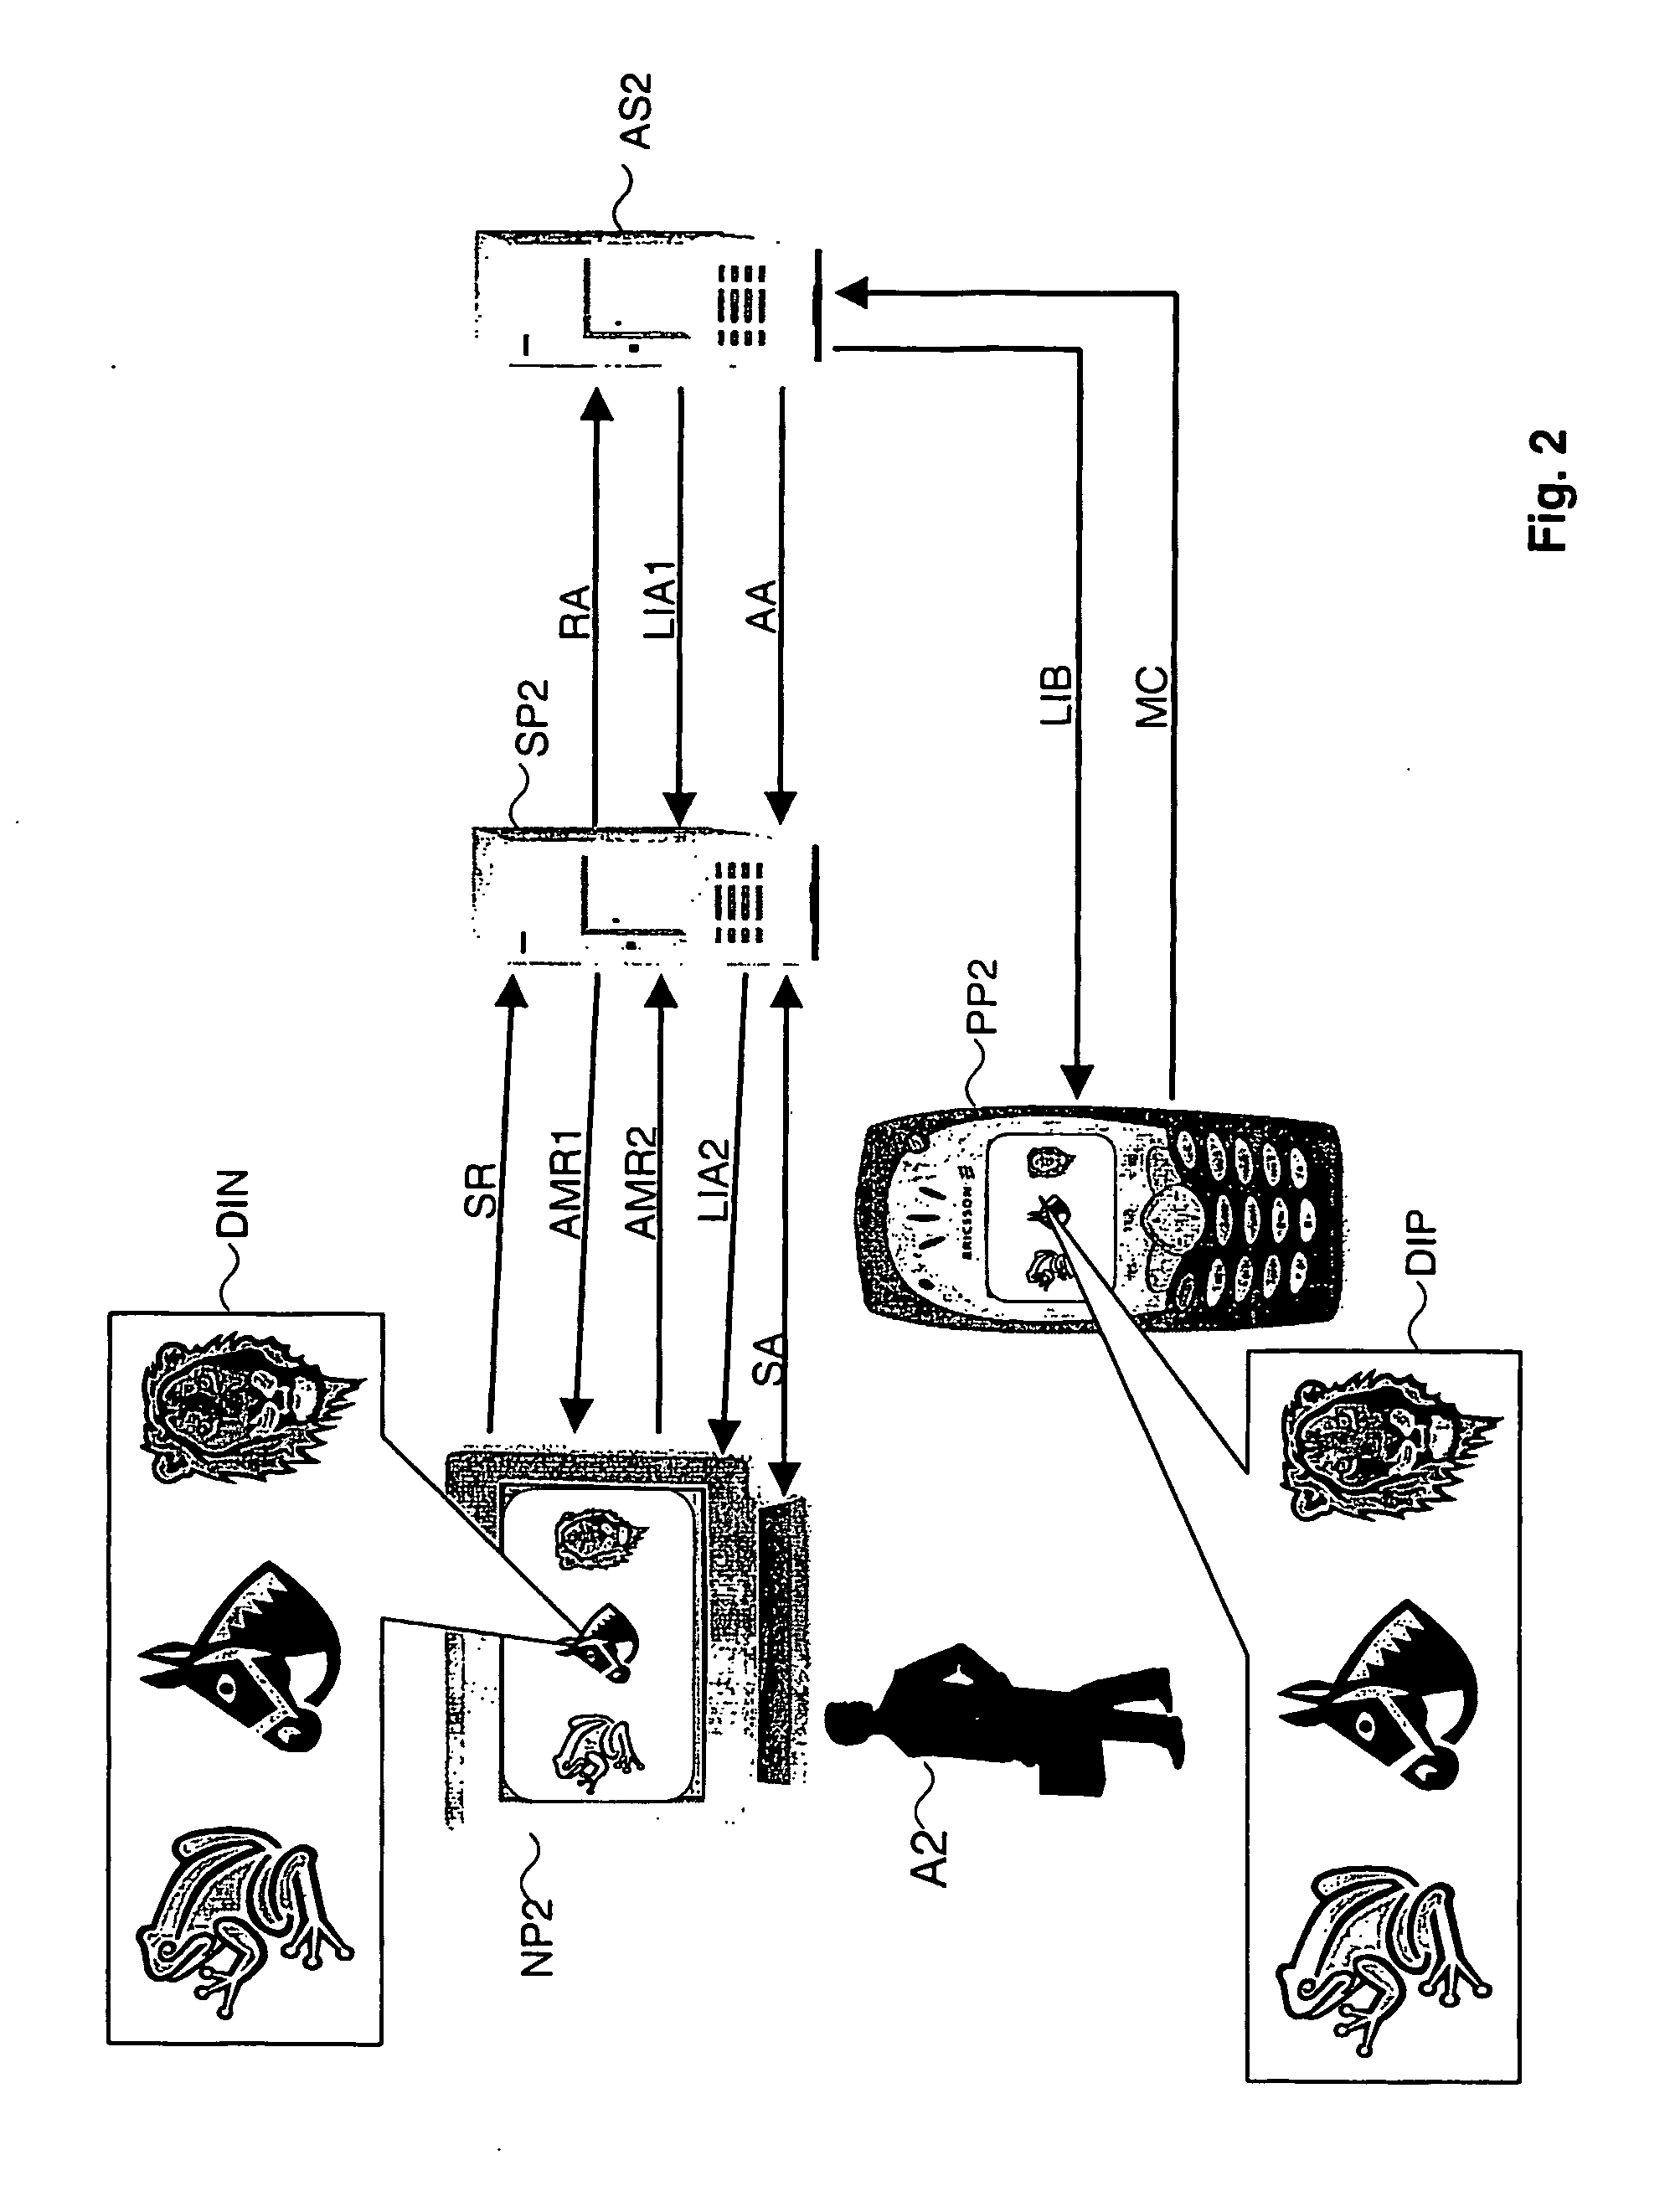 Method for linking of devices